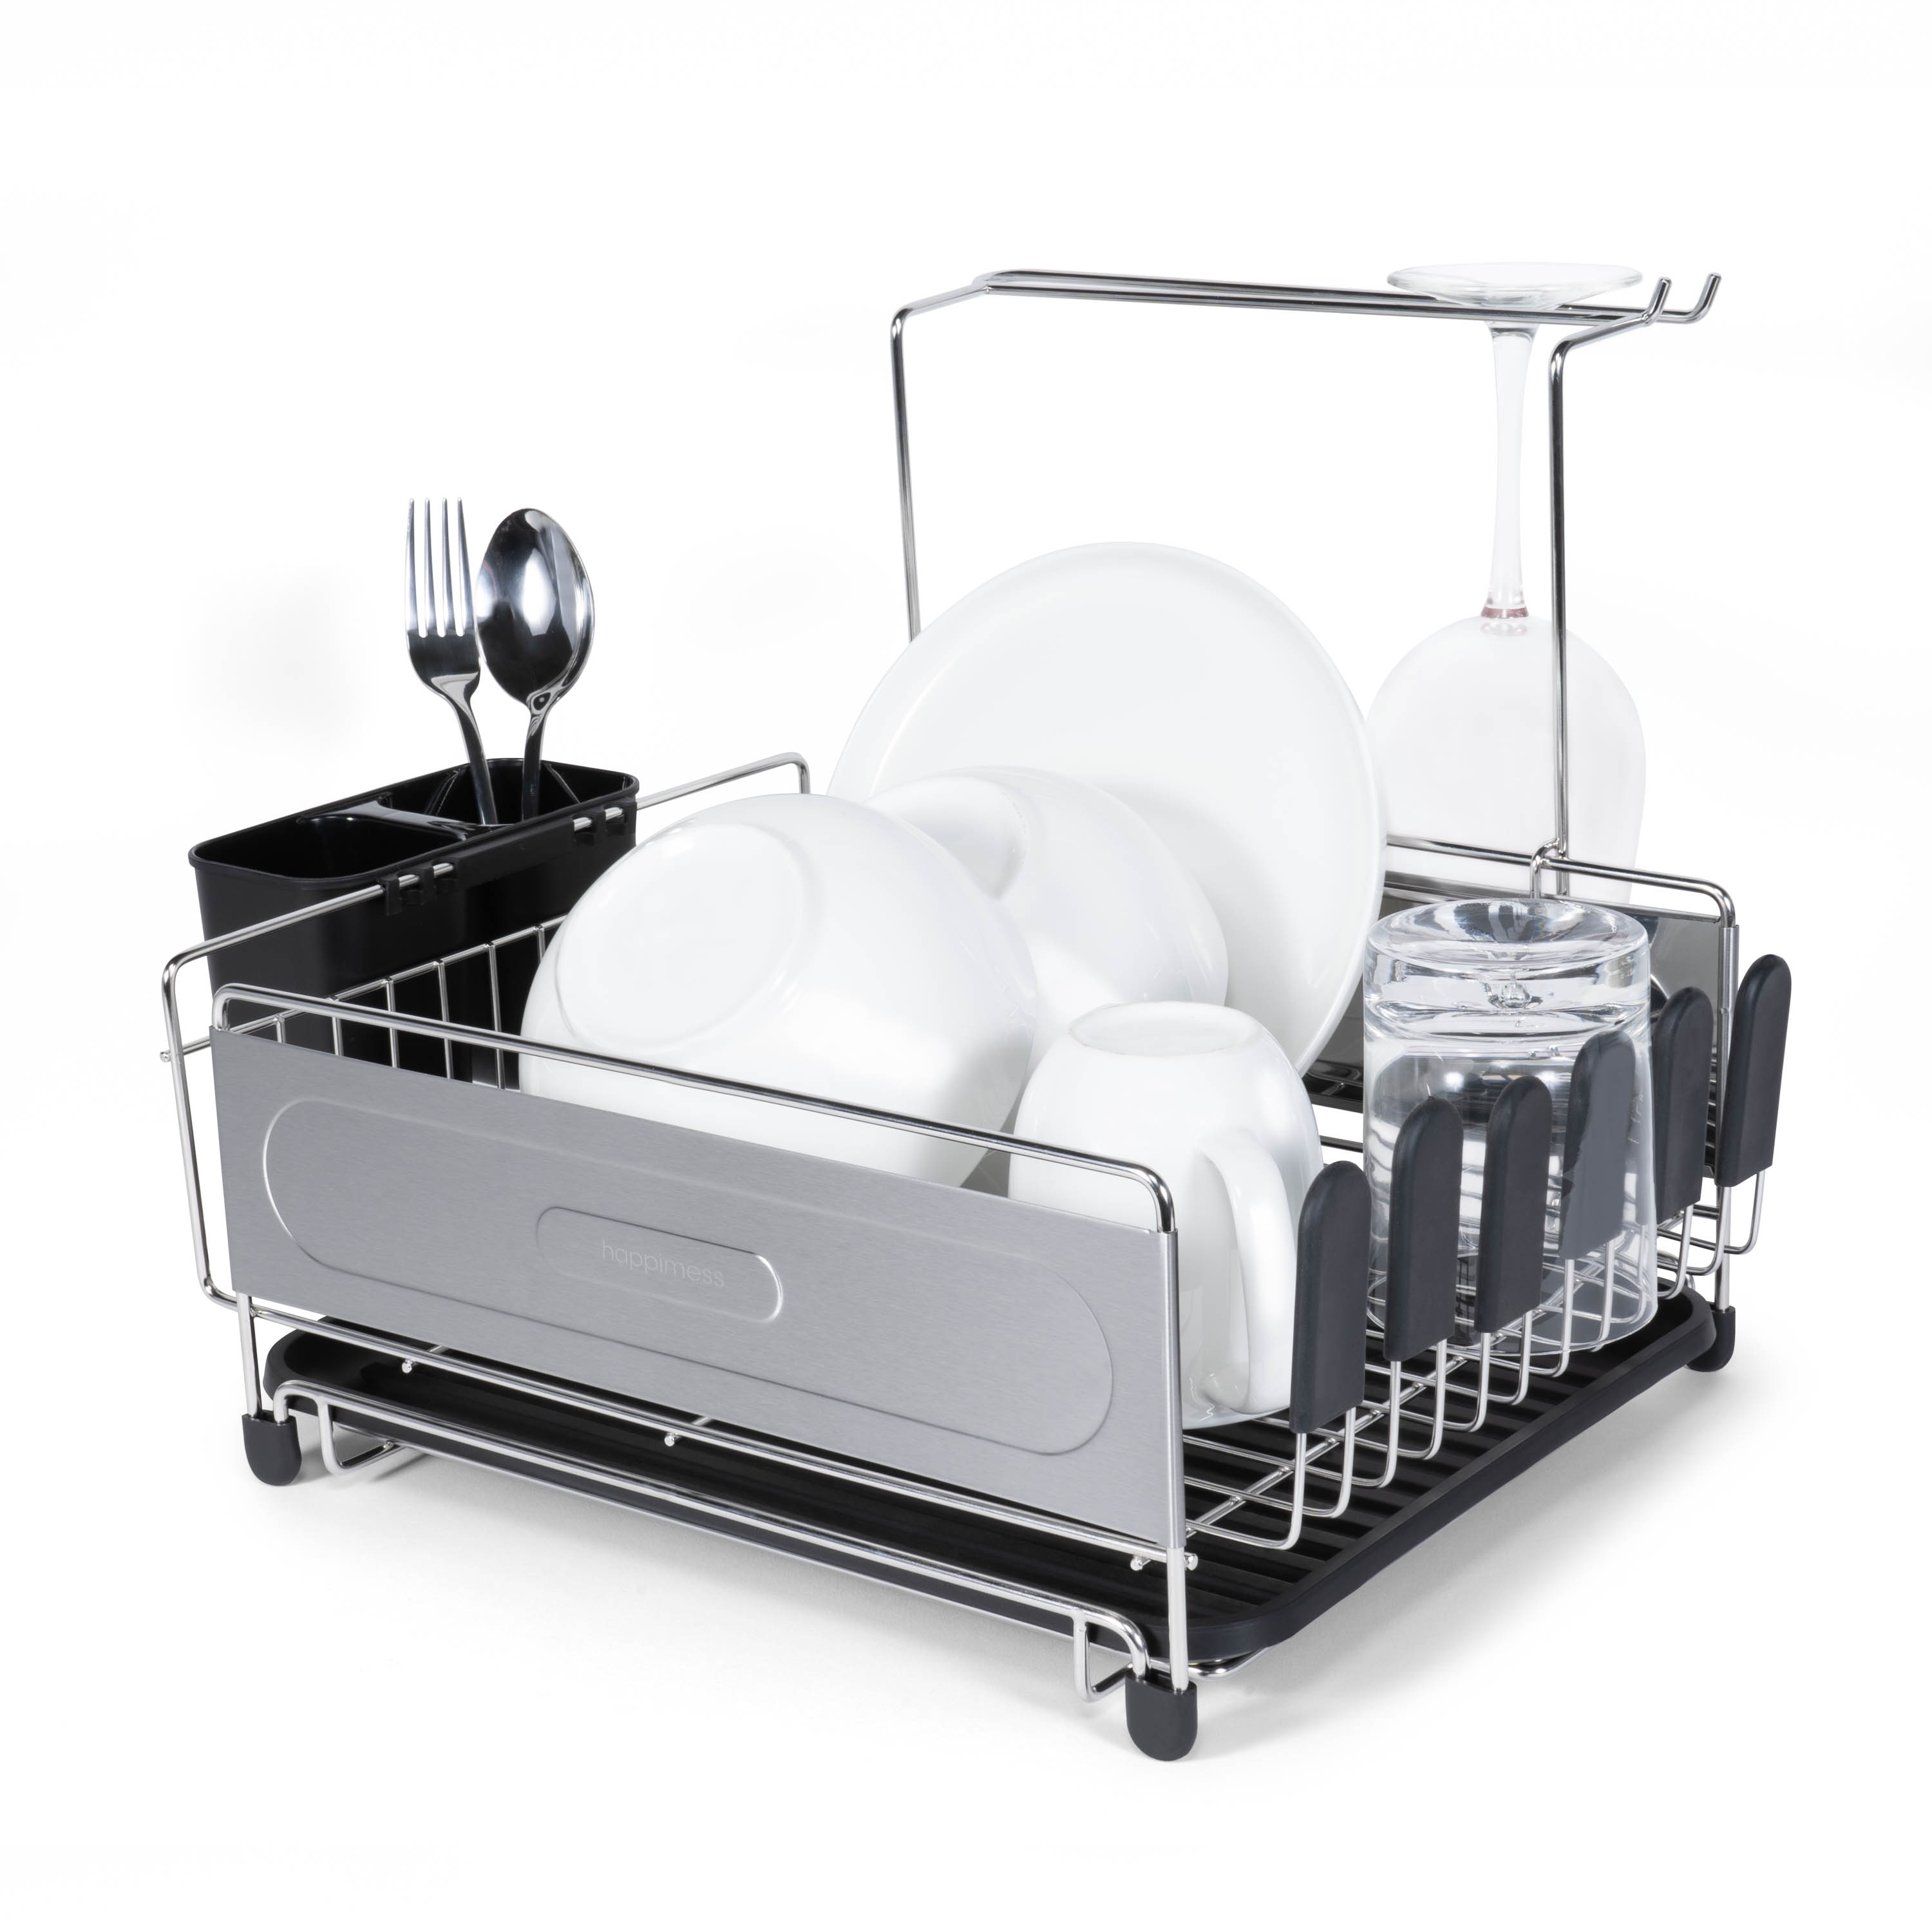 JASIWAY Roll Up Dish Drying Rack, Expandable 304 Stainless Steel Portable  Drainer for Kitchen Sink Counter, Foldable Over The Sink Cover with